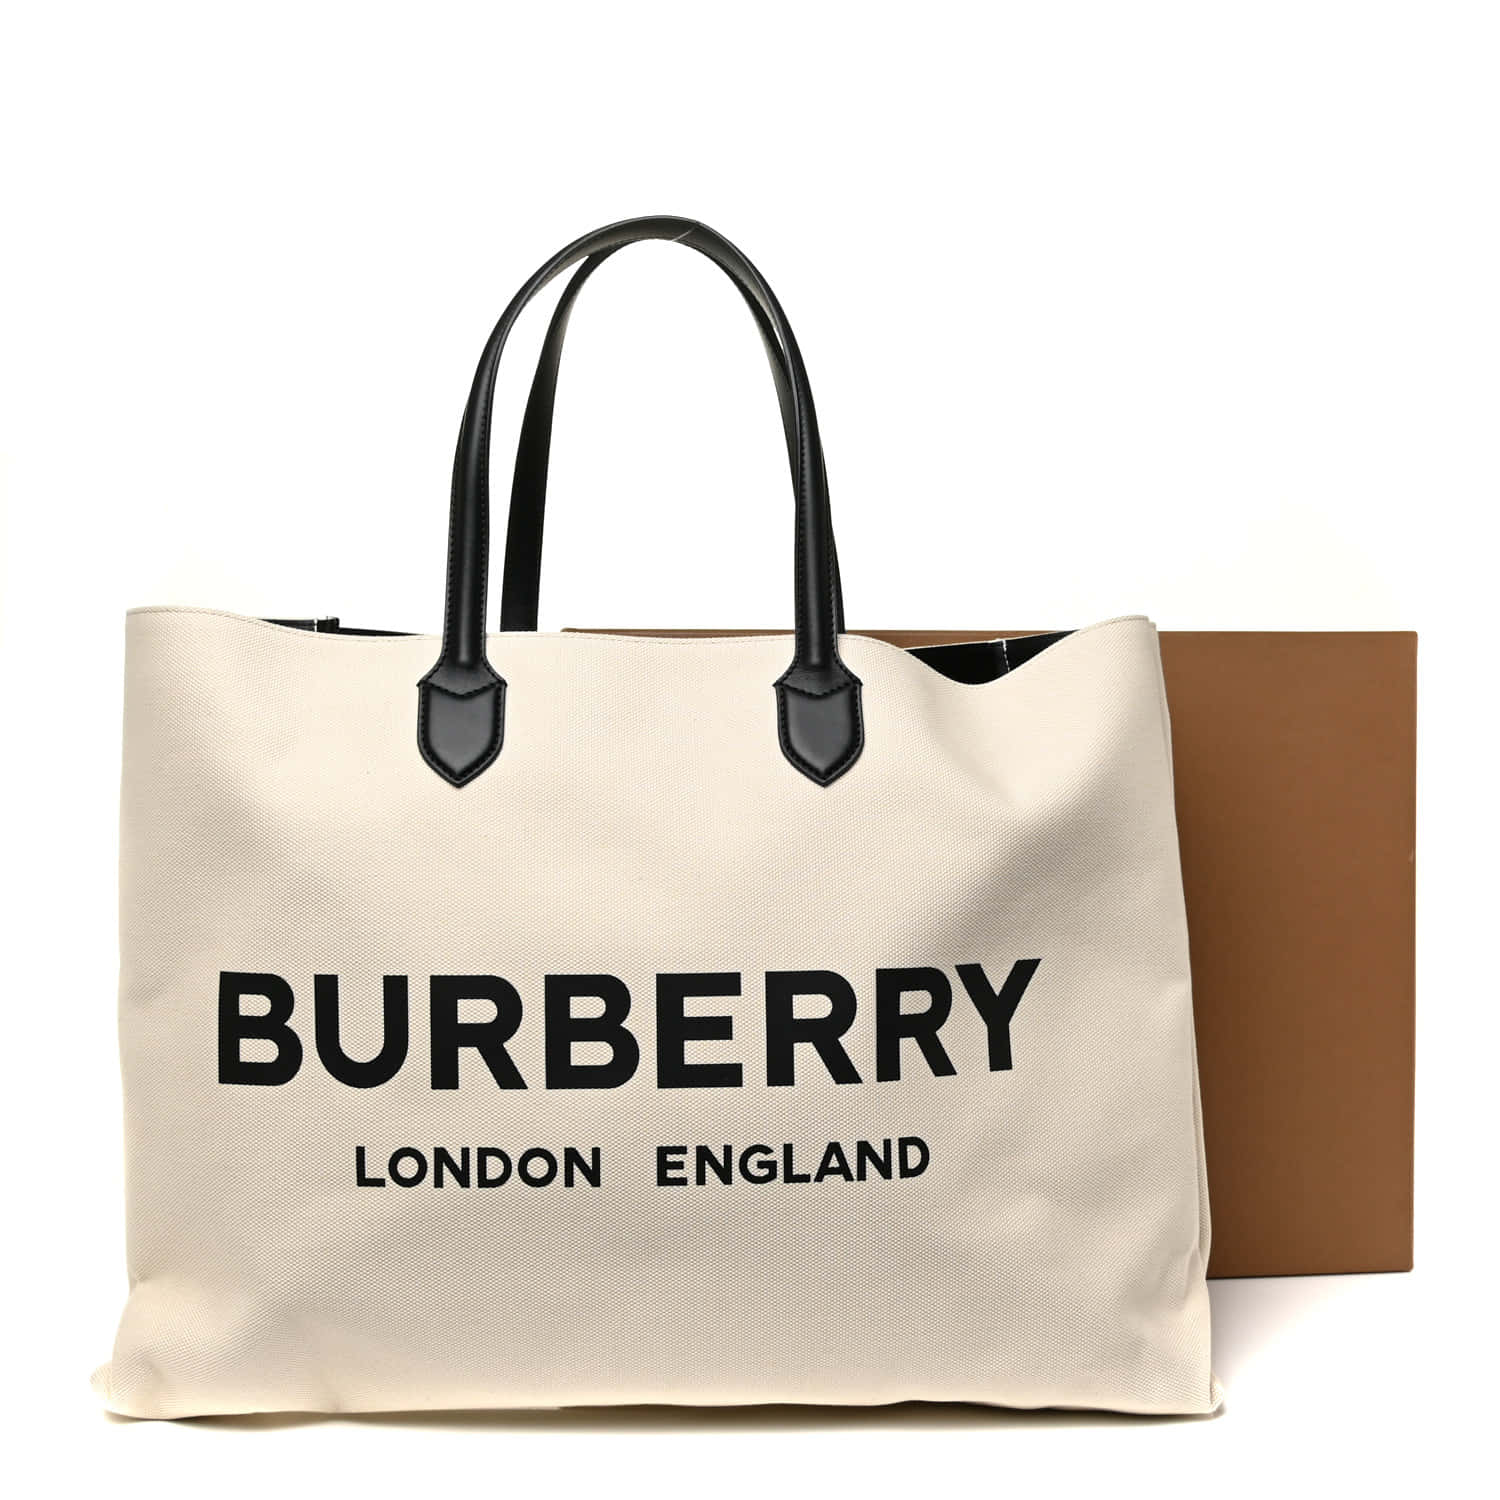 Capture the ultimate luxury with Burberry